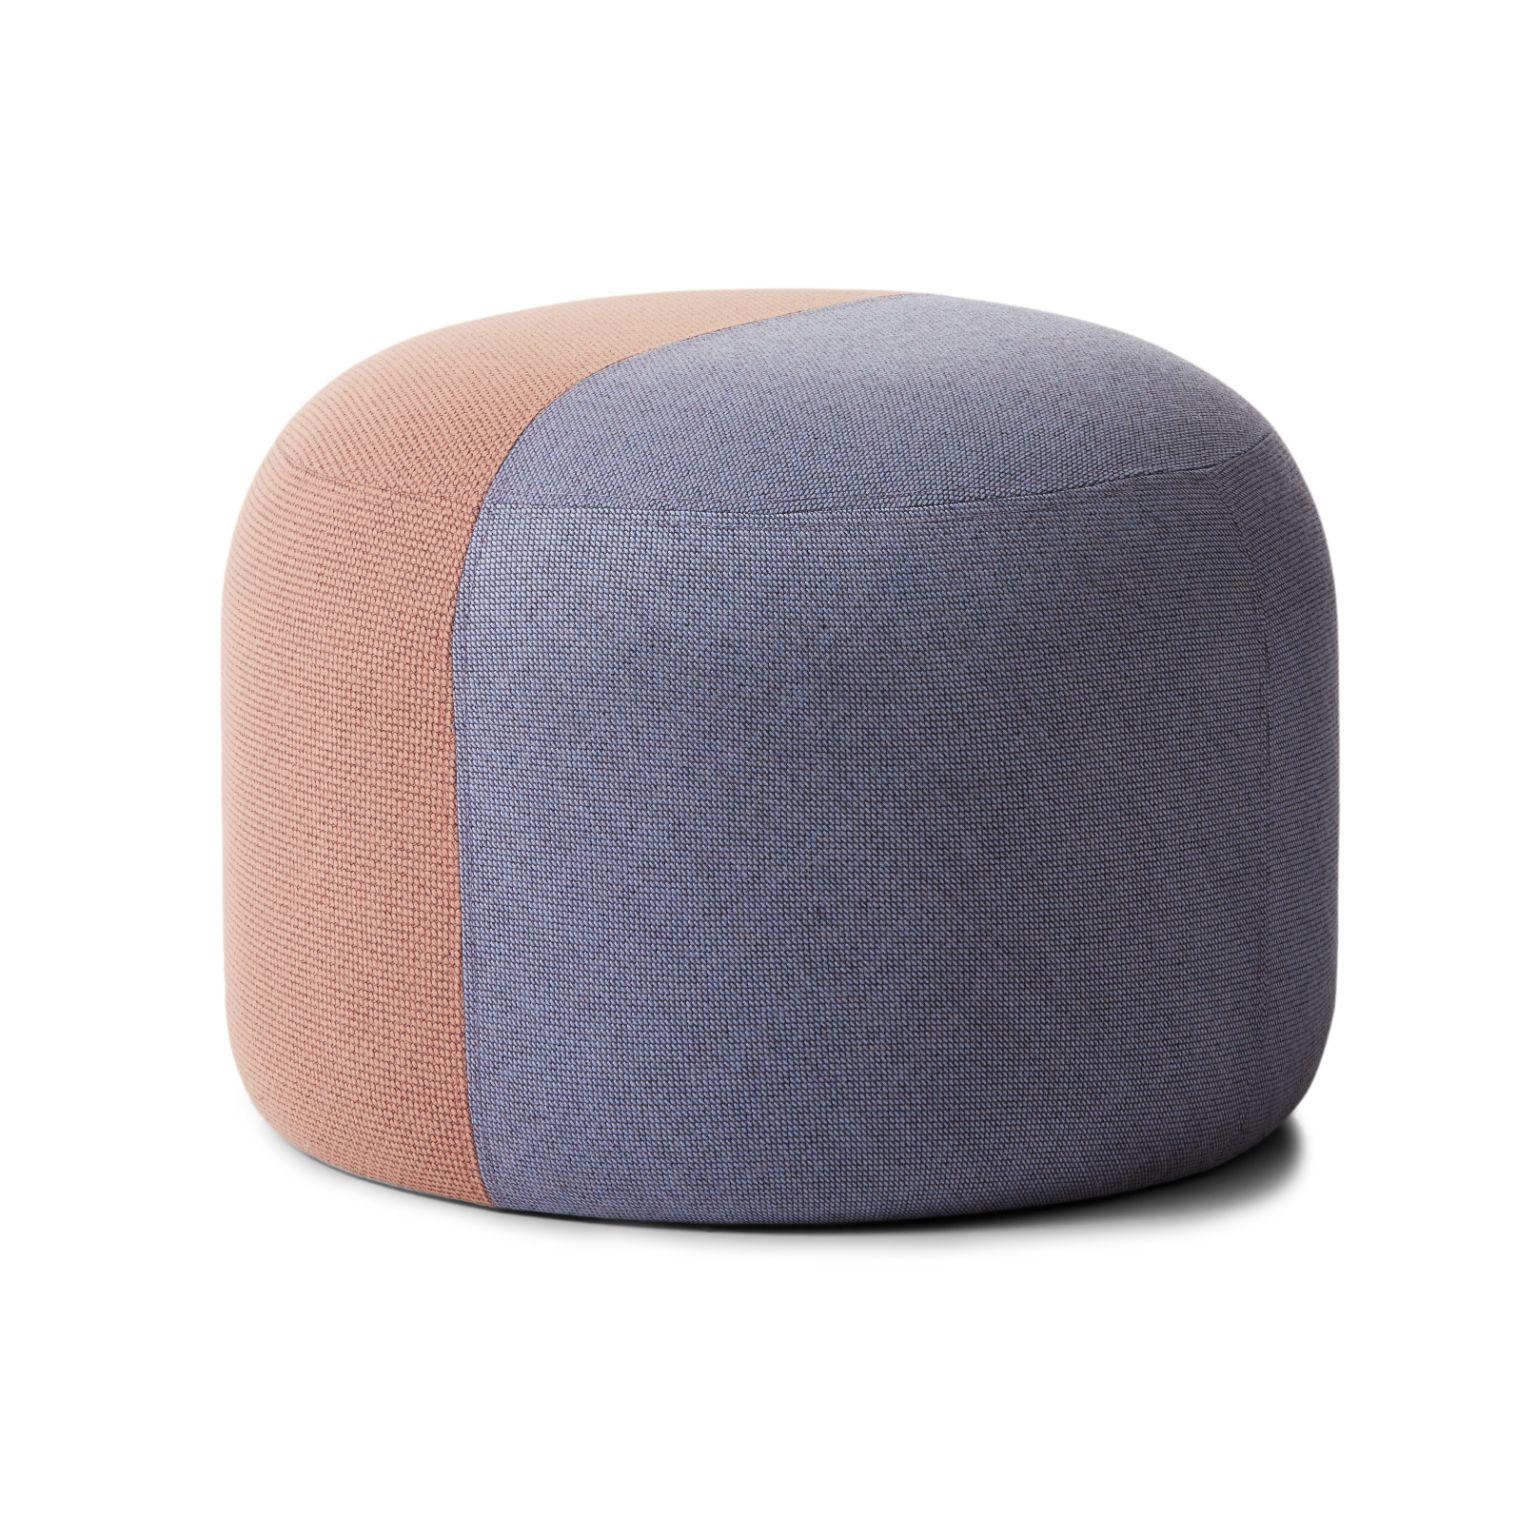 Dainty pouf fresh peach soft violet by Warm Nordic
Dimensions: D55 x H 39 cm
Material: Textile upholstery, Wooden frame, foam.
Weight: 9.5 kg
Also available in different colors and finishes.

Sophisticated, two-coloured pouf with soft shapes